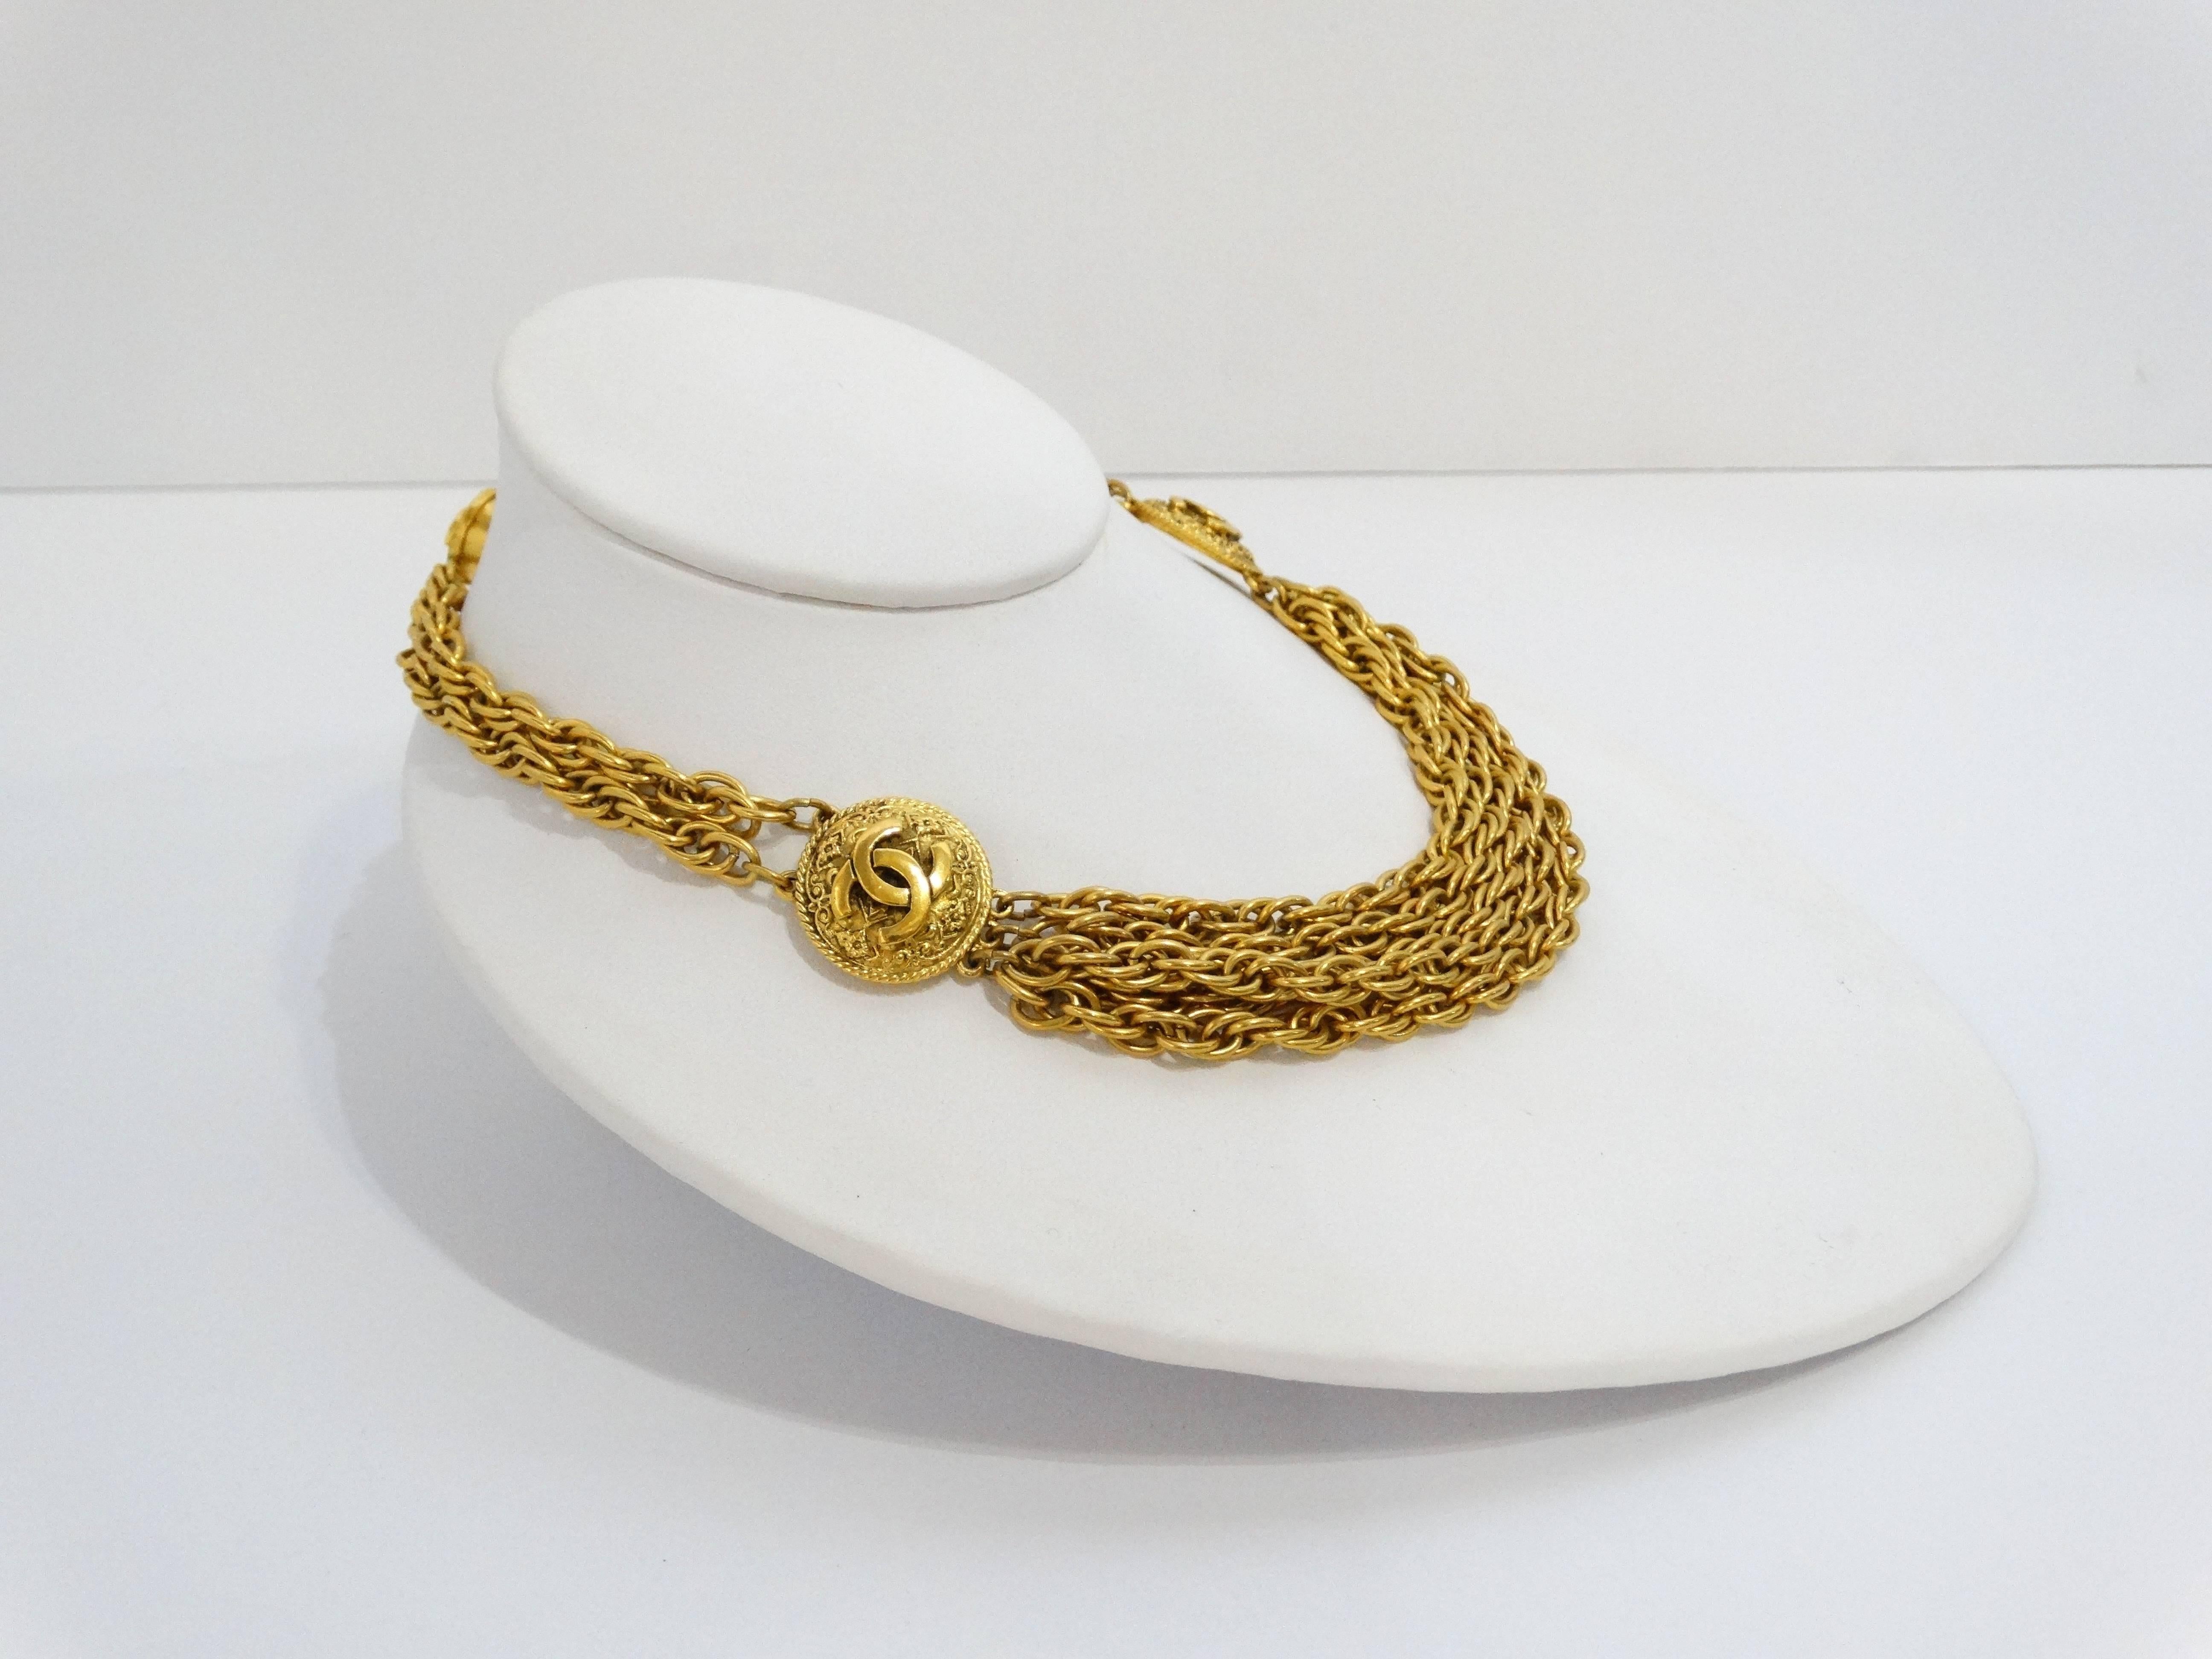 1980s Chanel Choker necklace in a brilliant gold! Two CC medallions at either side of the necklace with 5 layers Of rope chains. Back CC logo clasp closure. Signatures at the back of both medallions. Made in France,,,plated gold. 